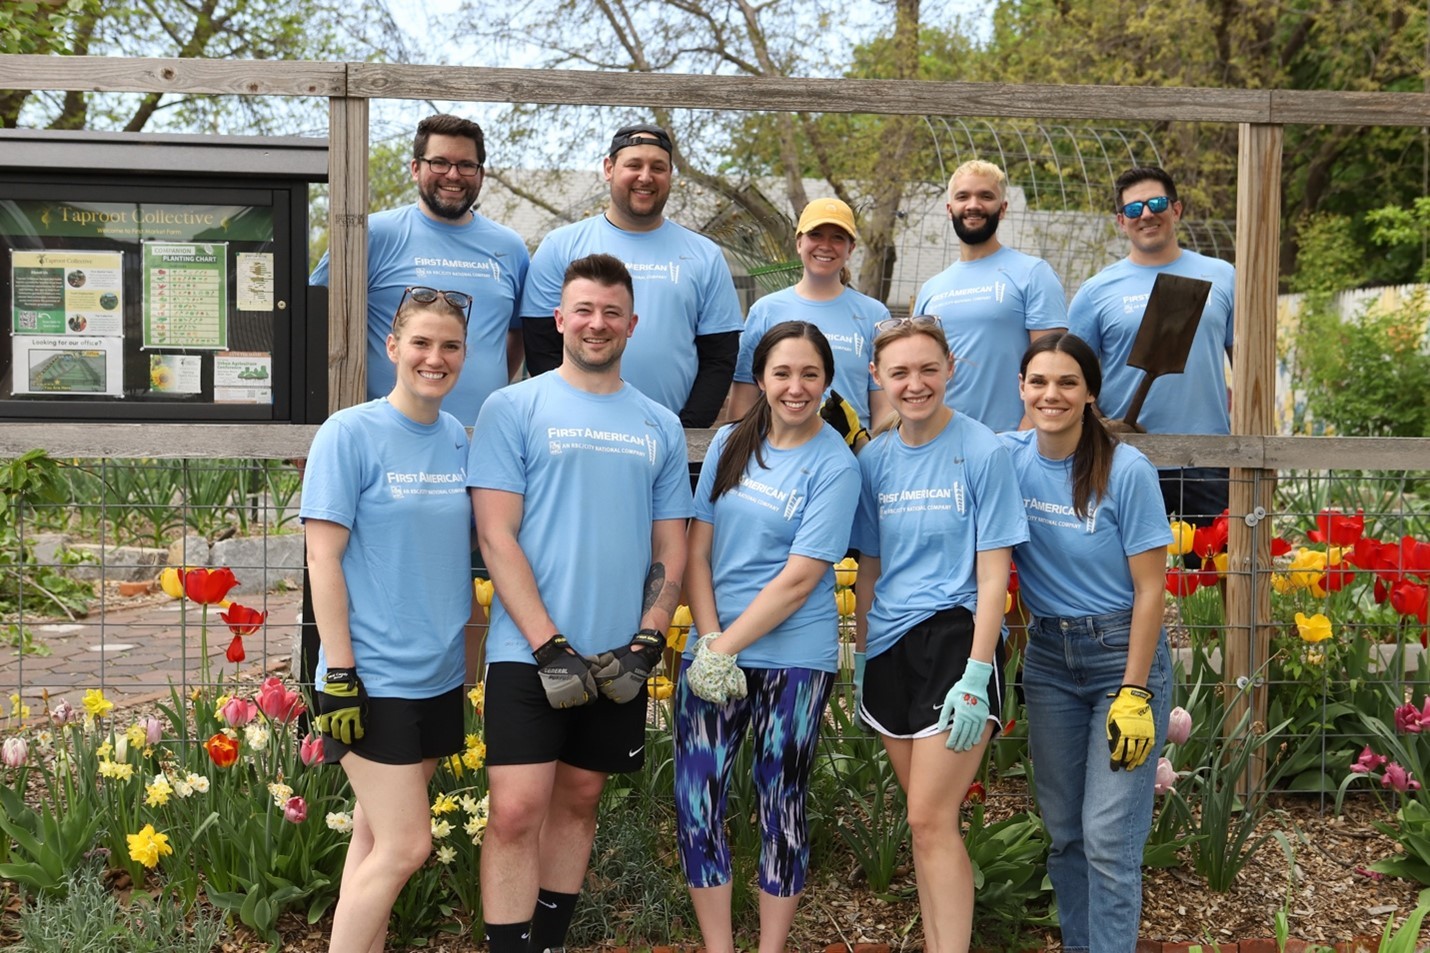 First American colleagues volunteer at a community garden in Rochester, NY to prepare the grounds for the season.

